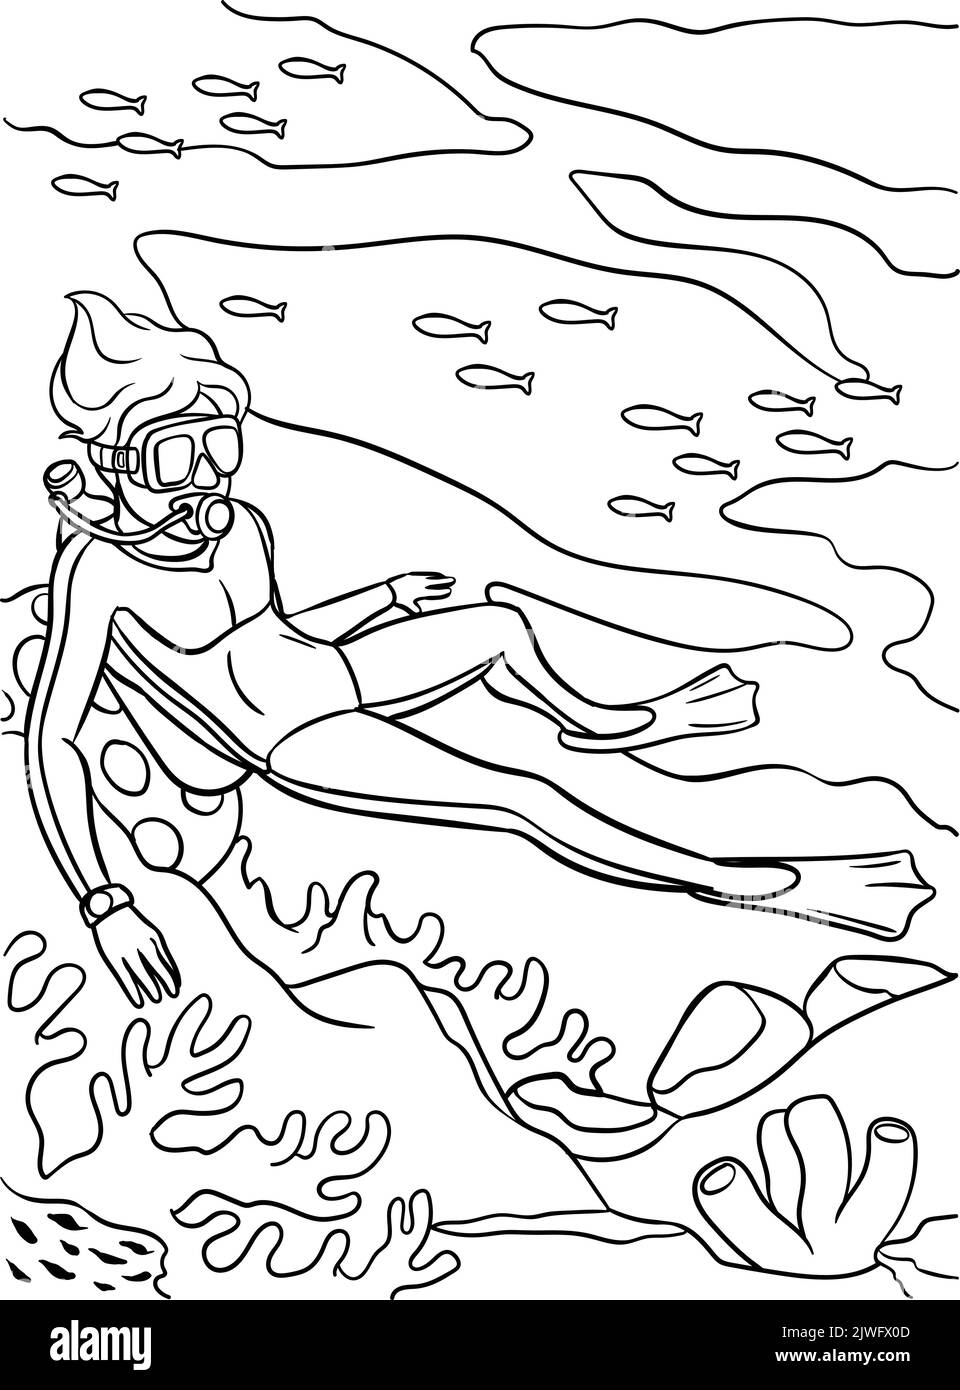 Scuba Diving Coloring Page for Kids Stock Vector